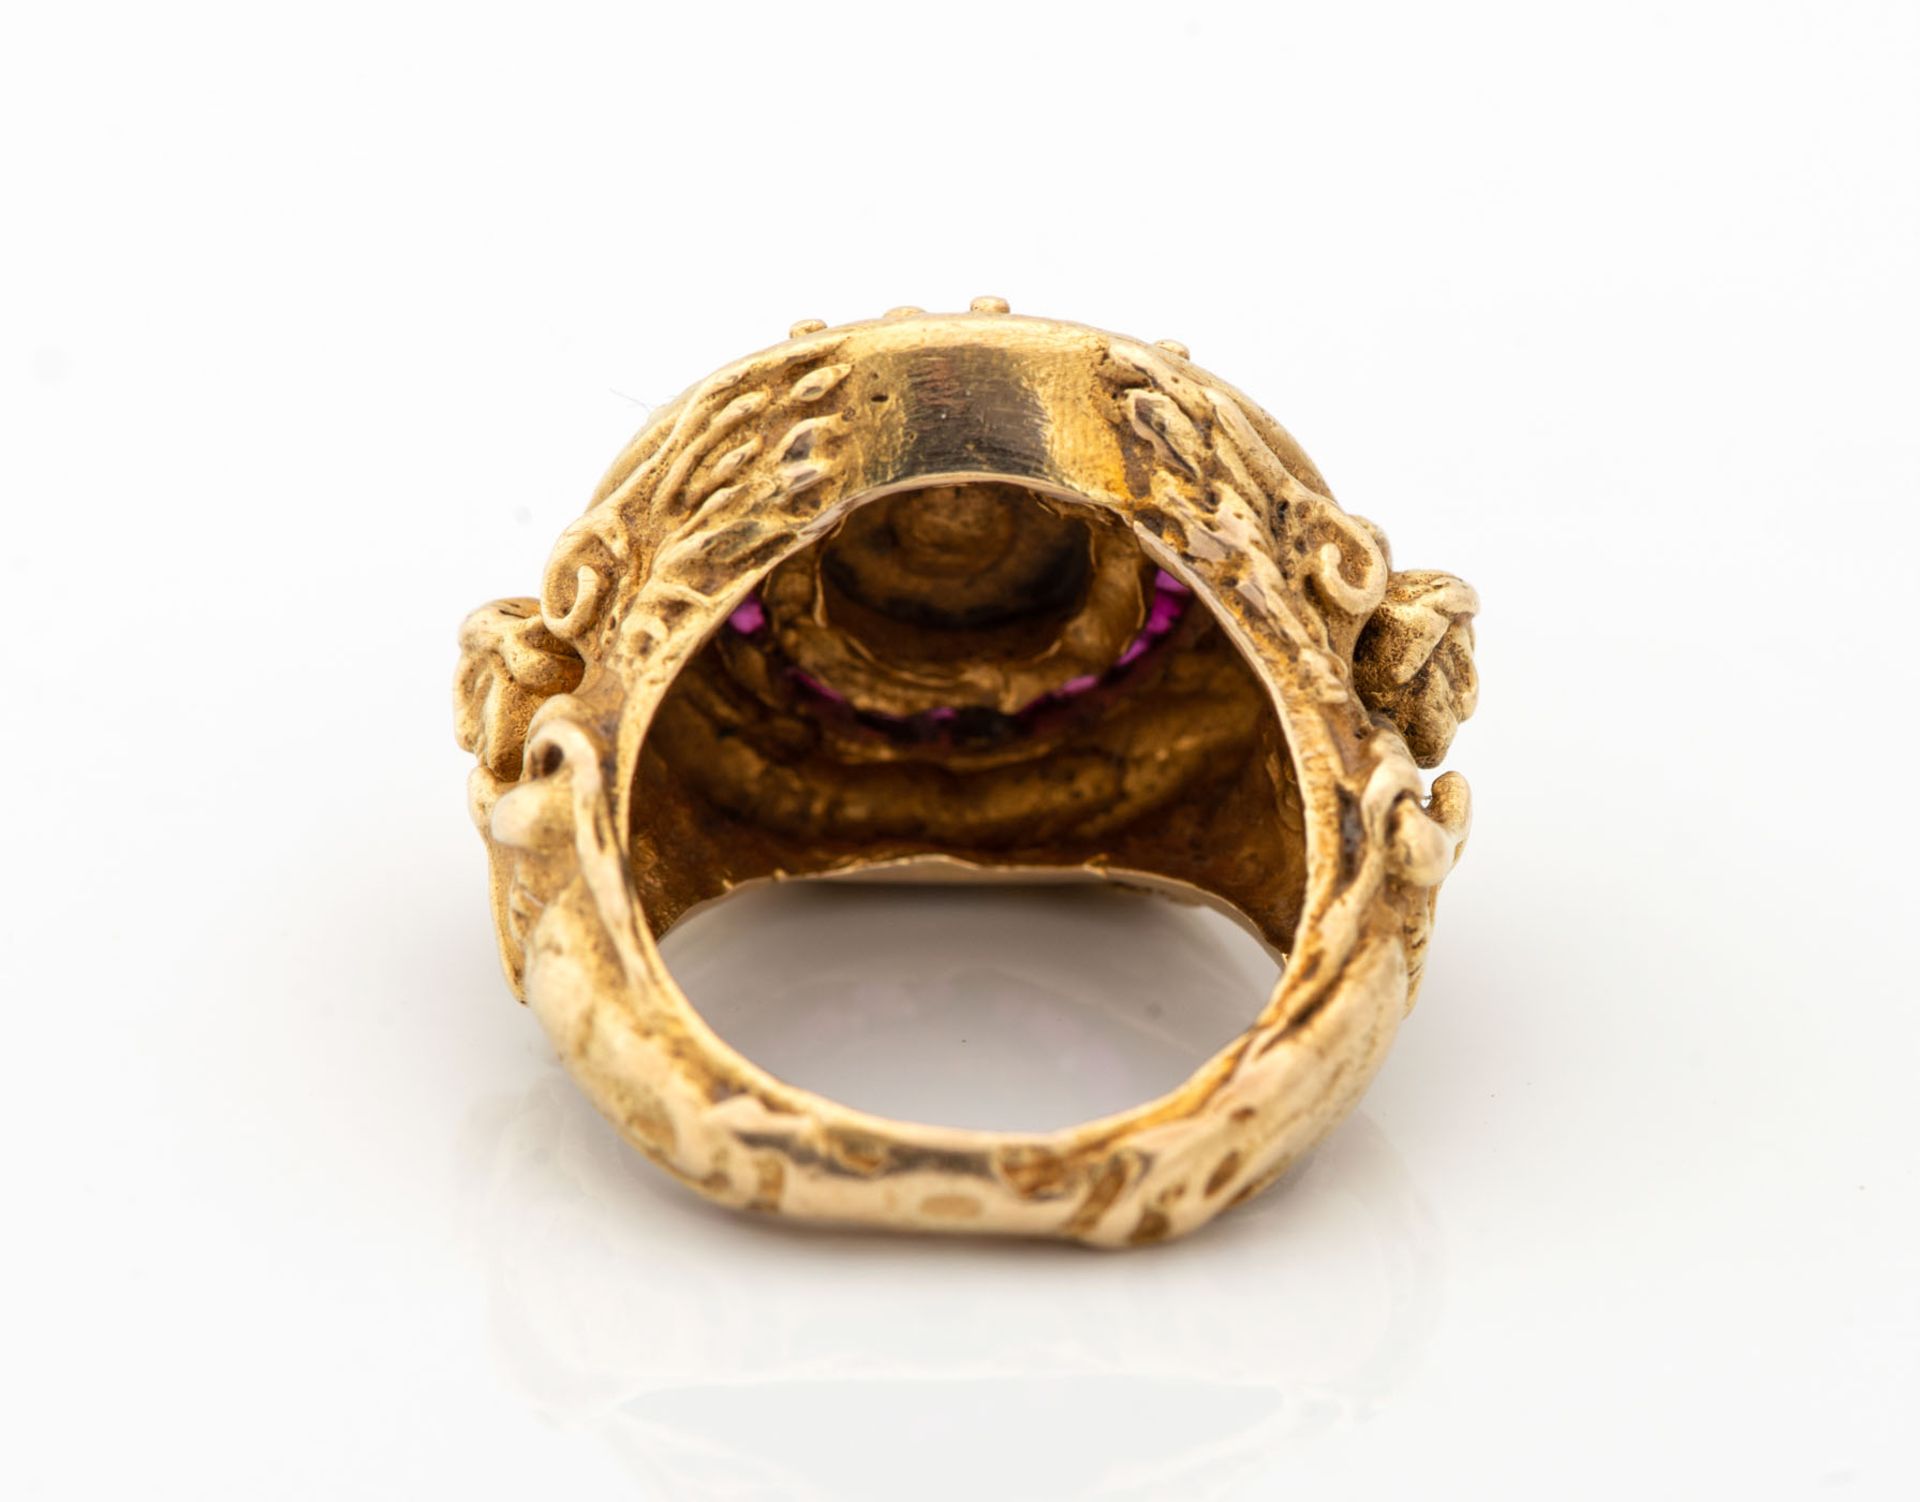 A Fine Baroque Style 18K Gold Rubies and Diamond Ring - Image 3 of 4